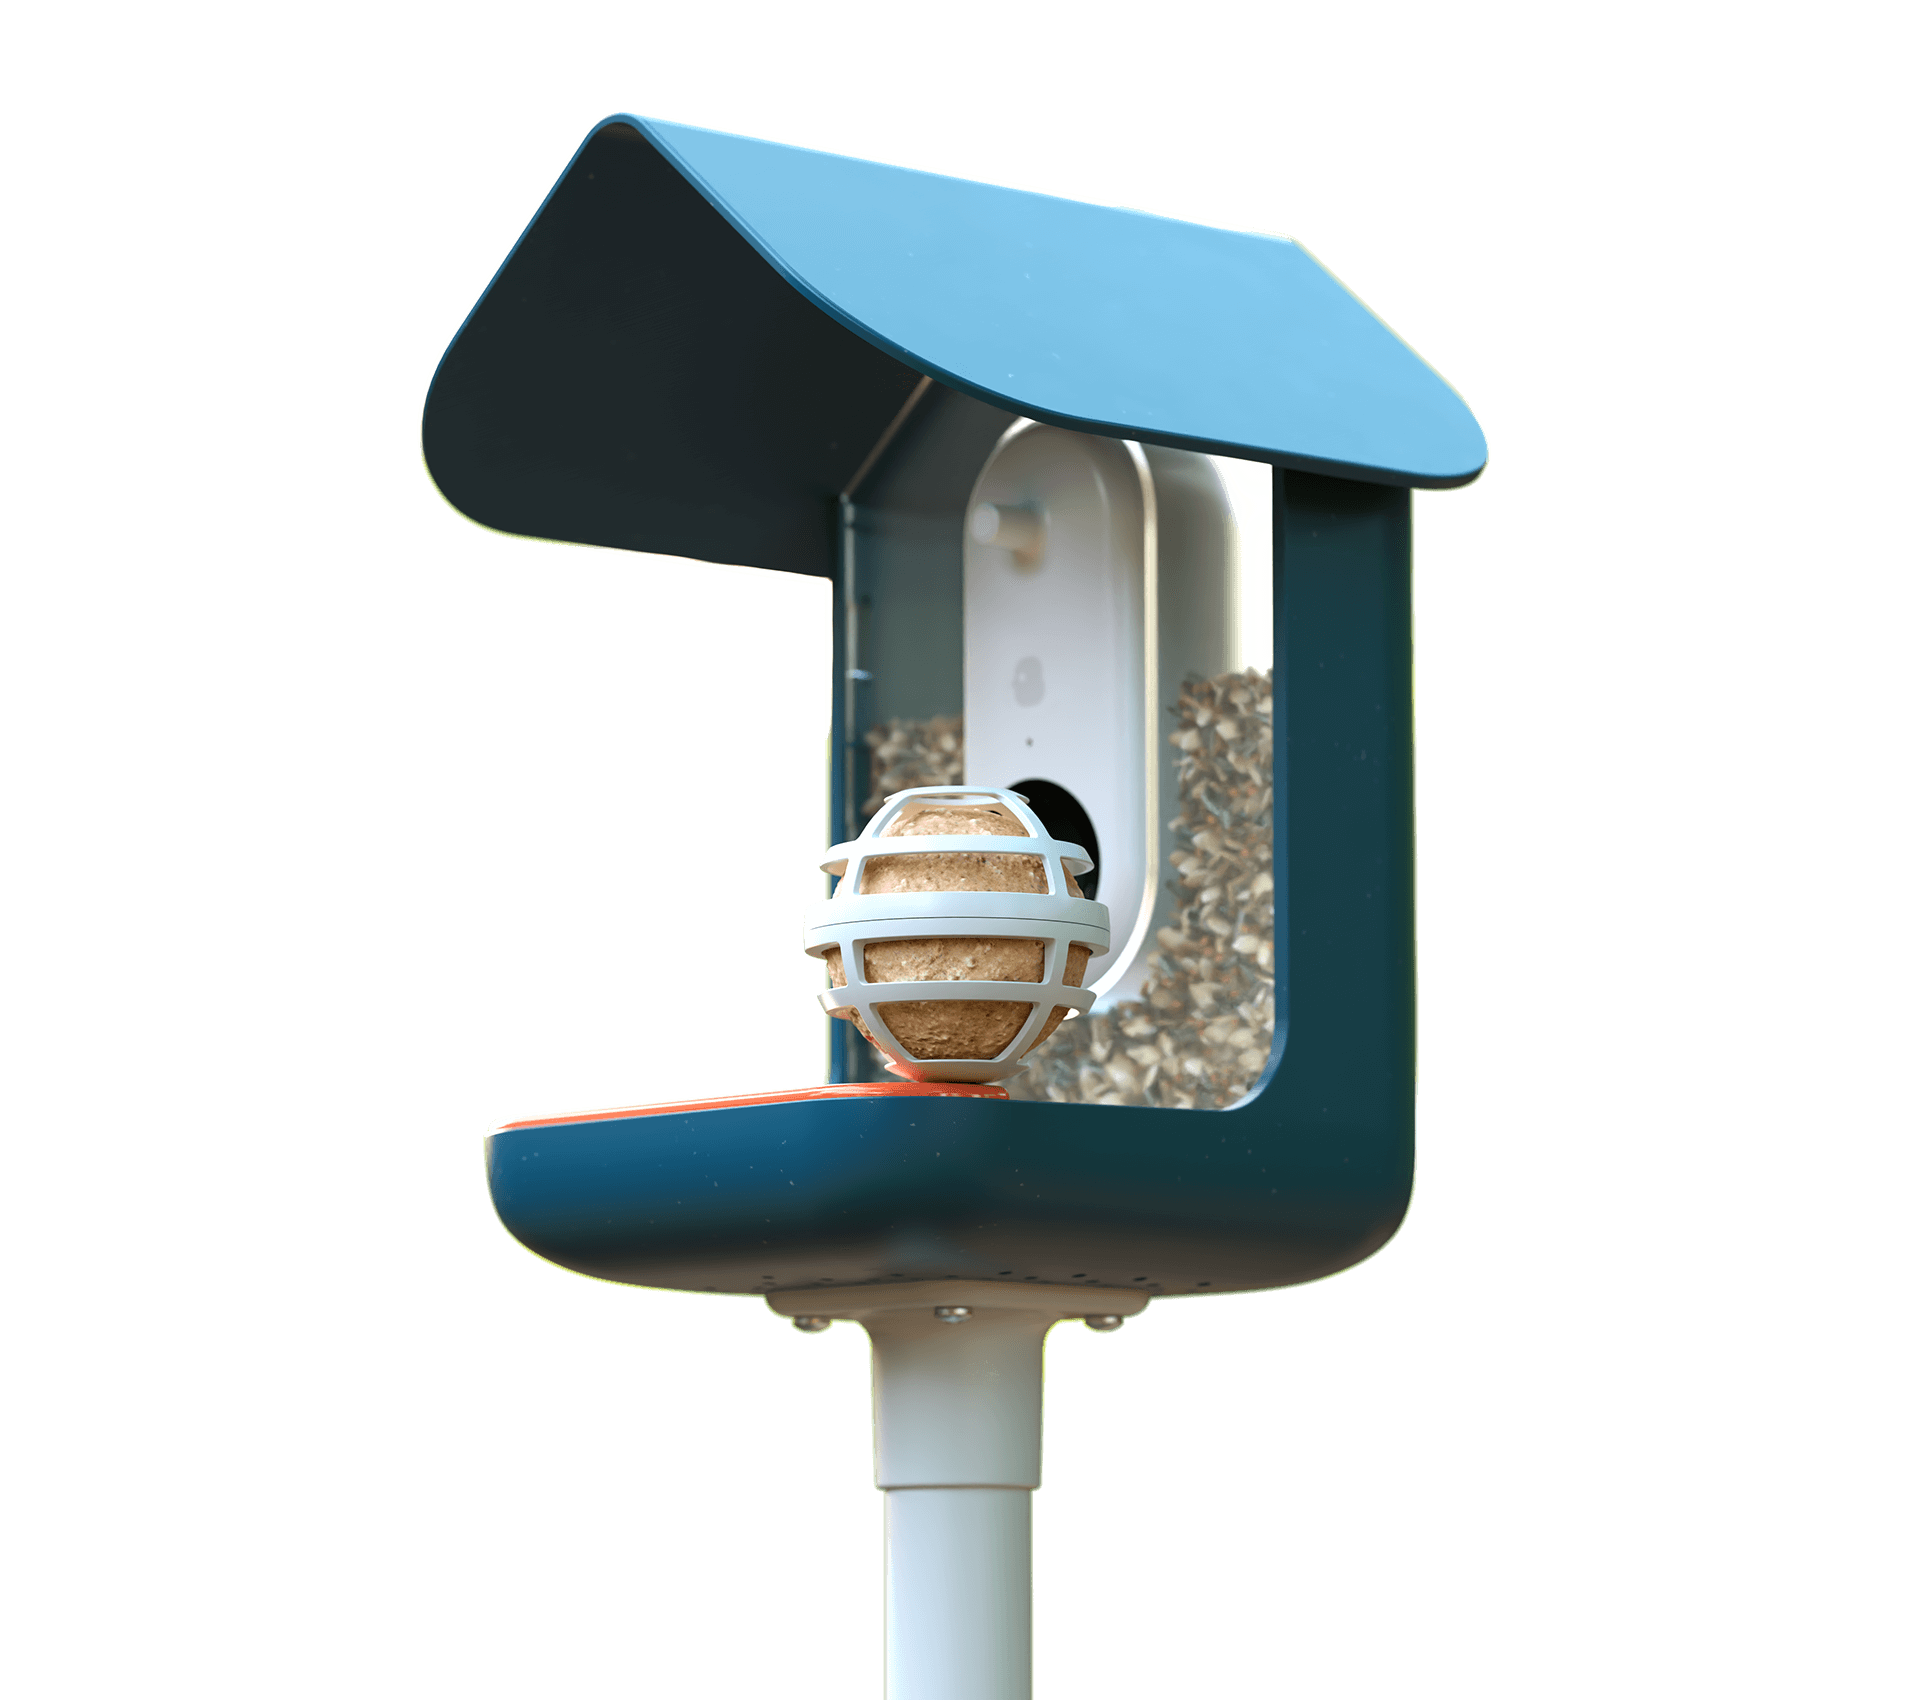 Deluxe Double Perch Add-on With Screw Mounts for Suet Ball & Bird Buddy  Bird Feeder Does Not Include Suet Ball Holder or Bird Buddy 